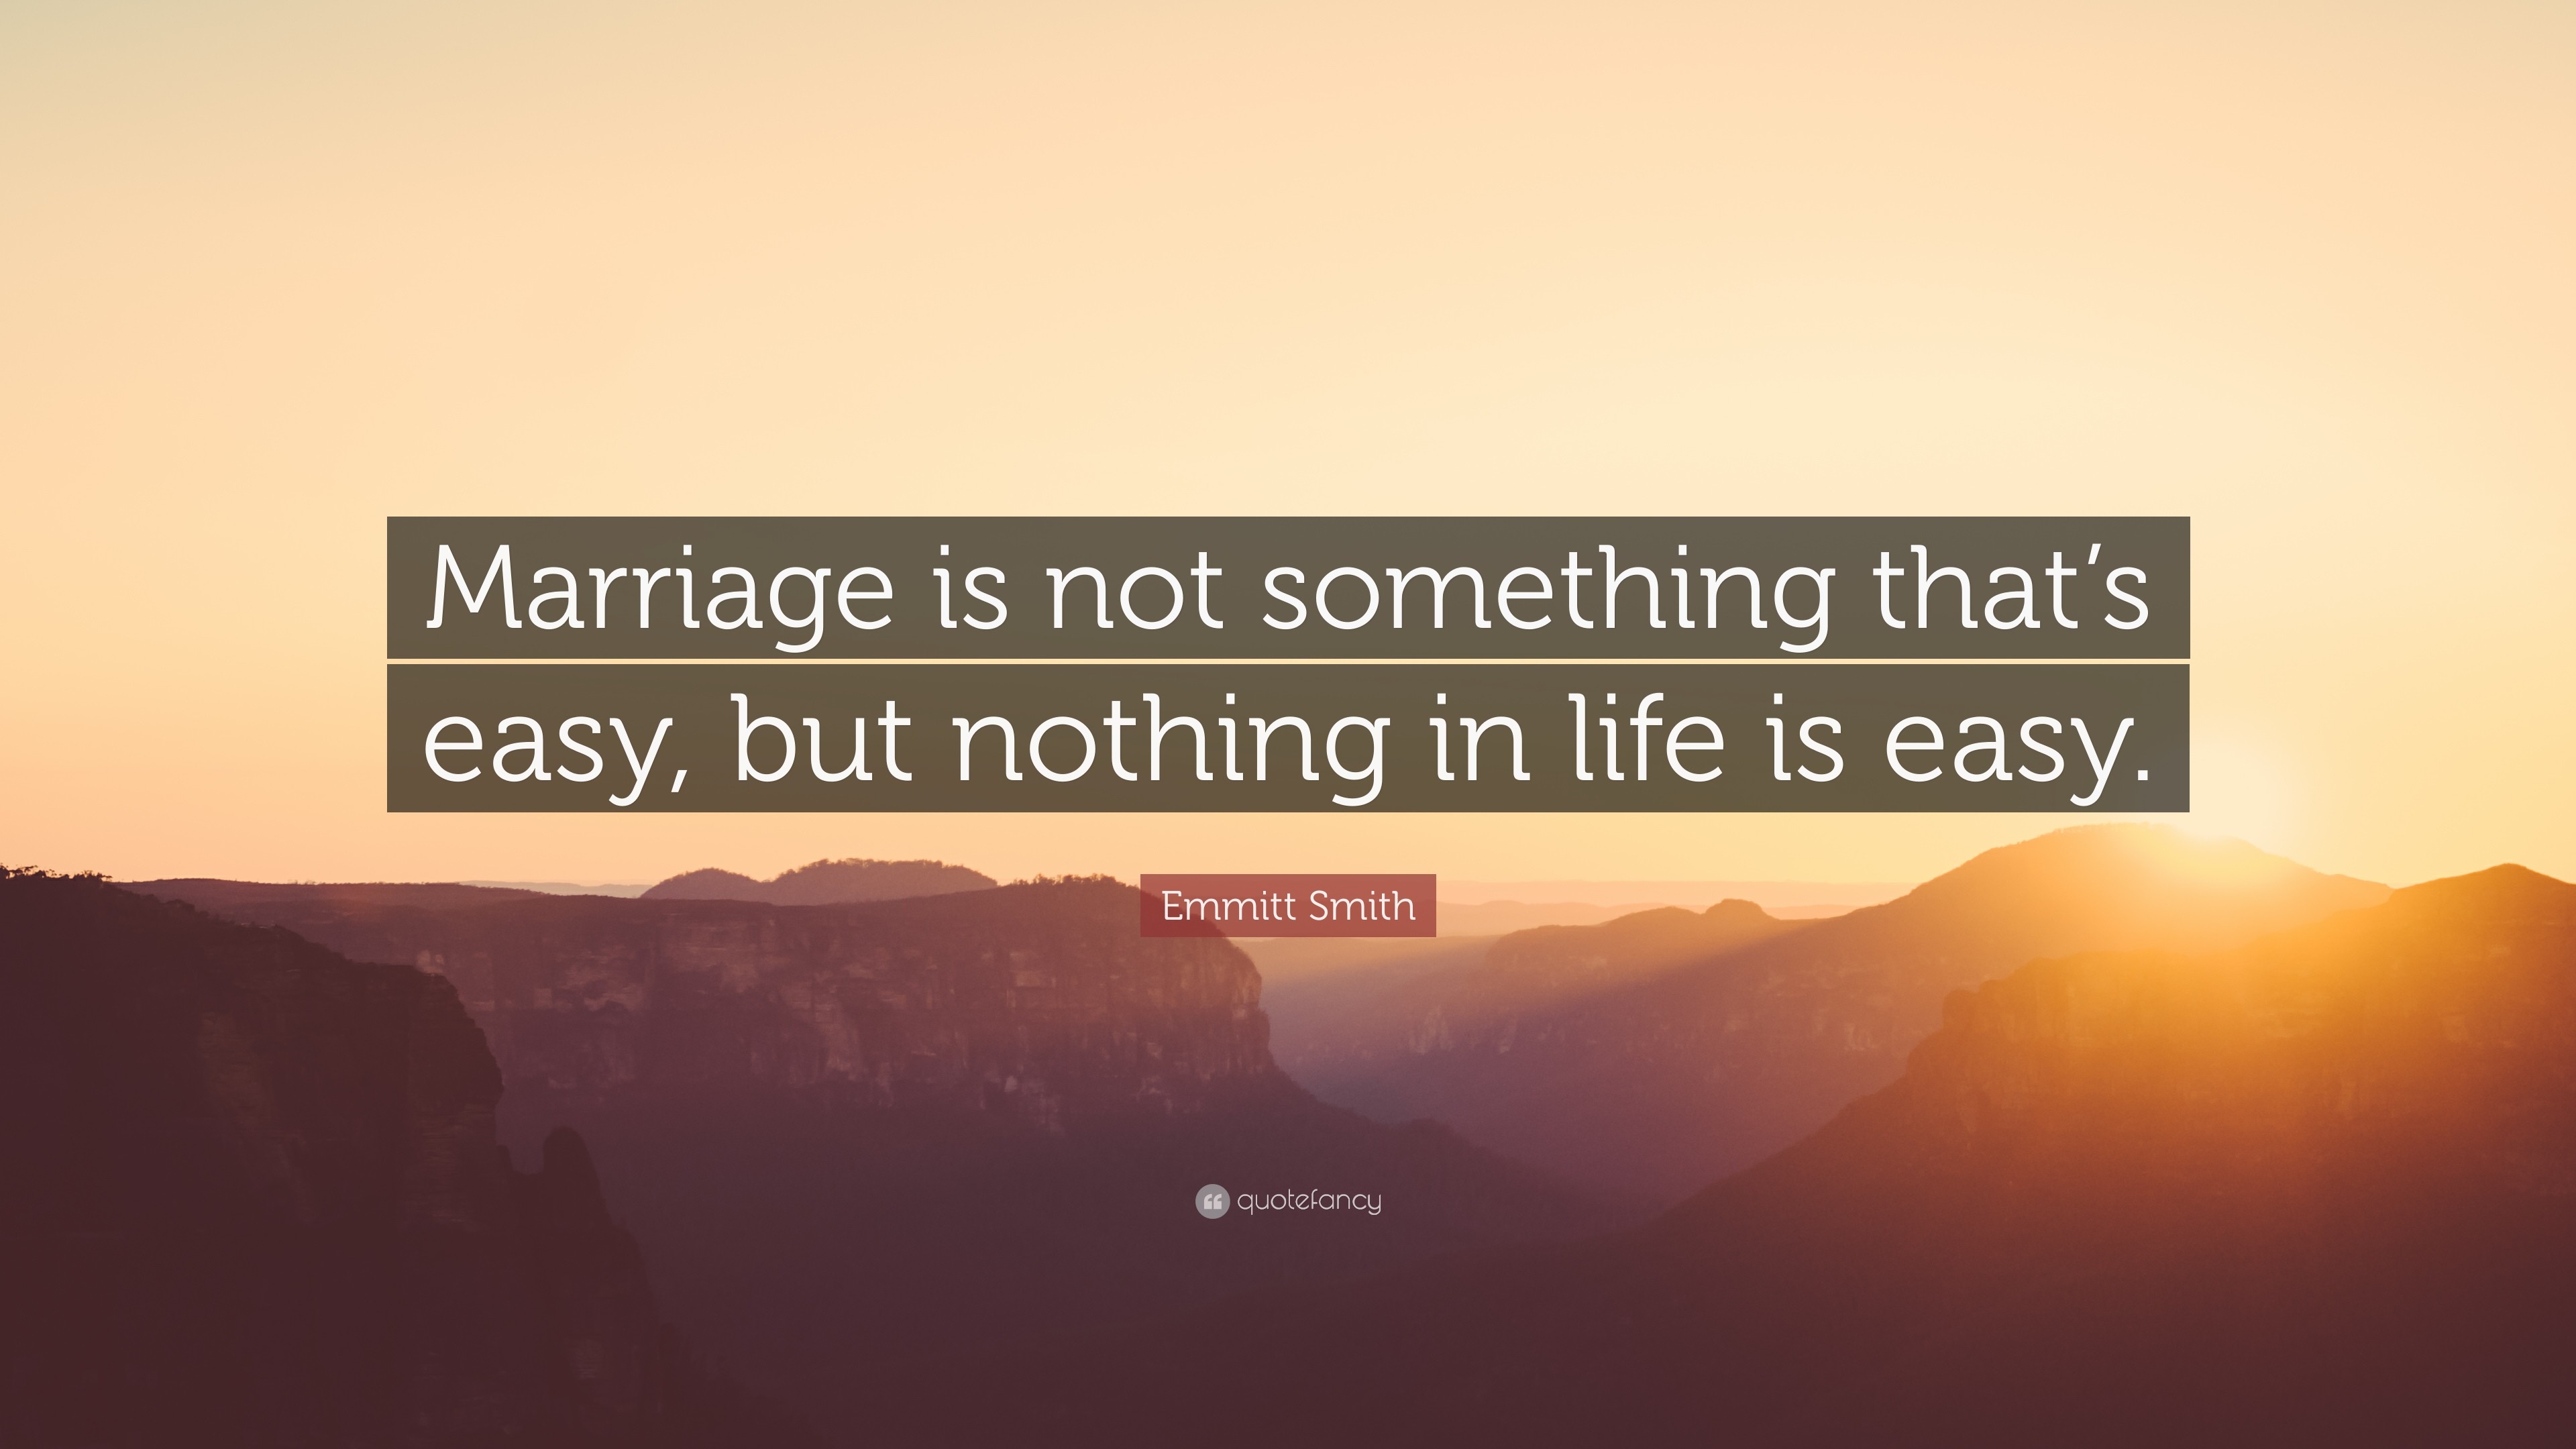 3840x2160 Emmitt Smith Quote: “Marriage is not something that's easy, but nothing in  life